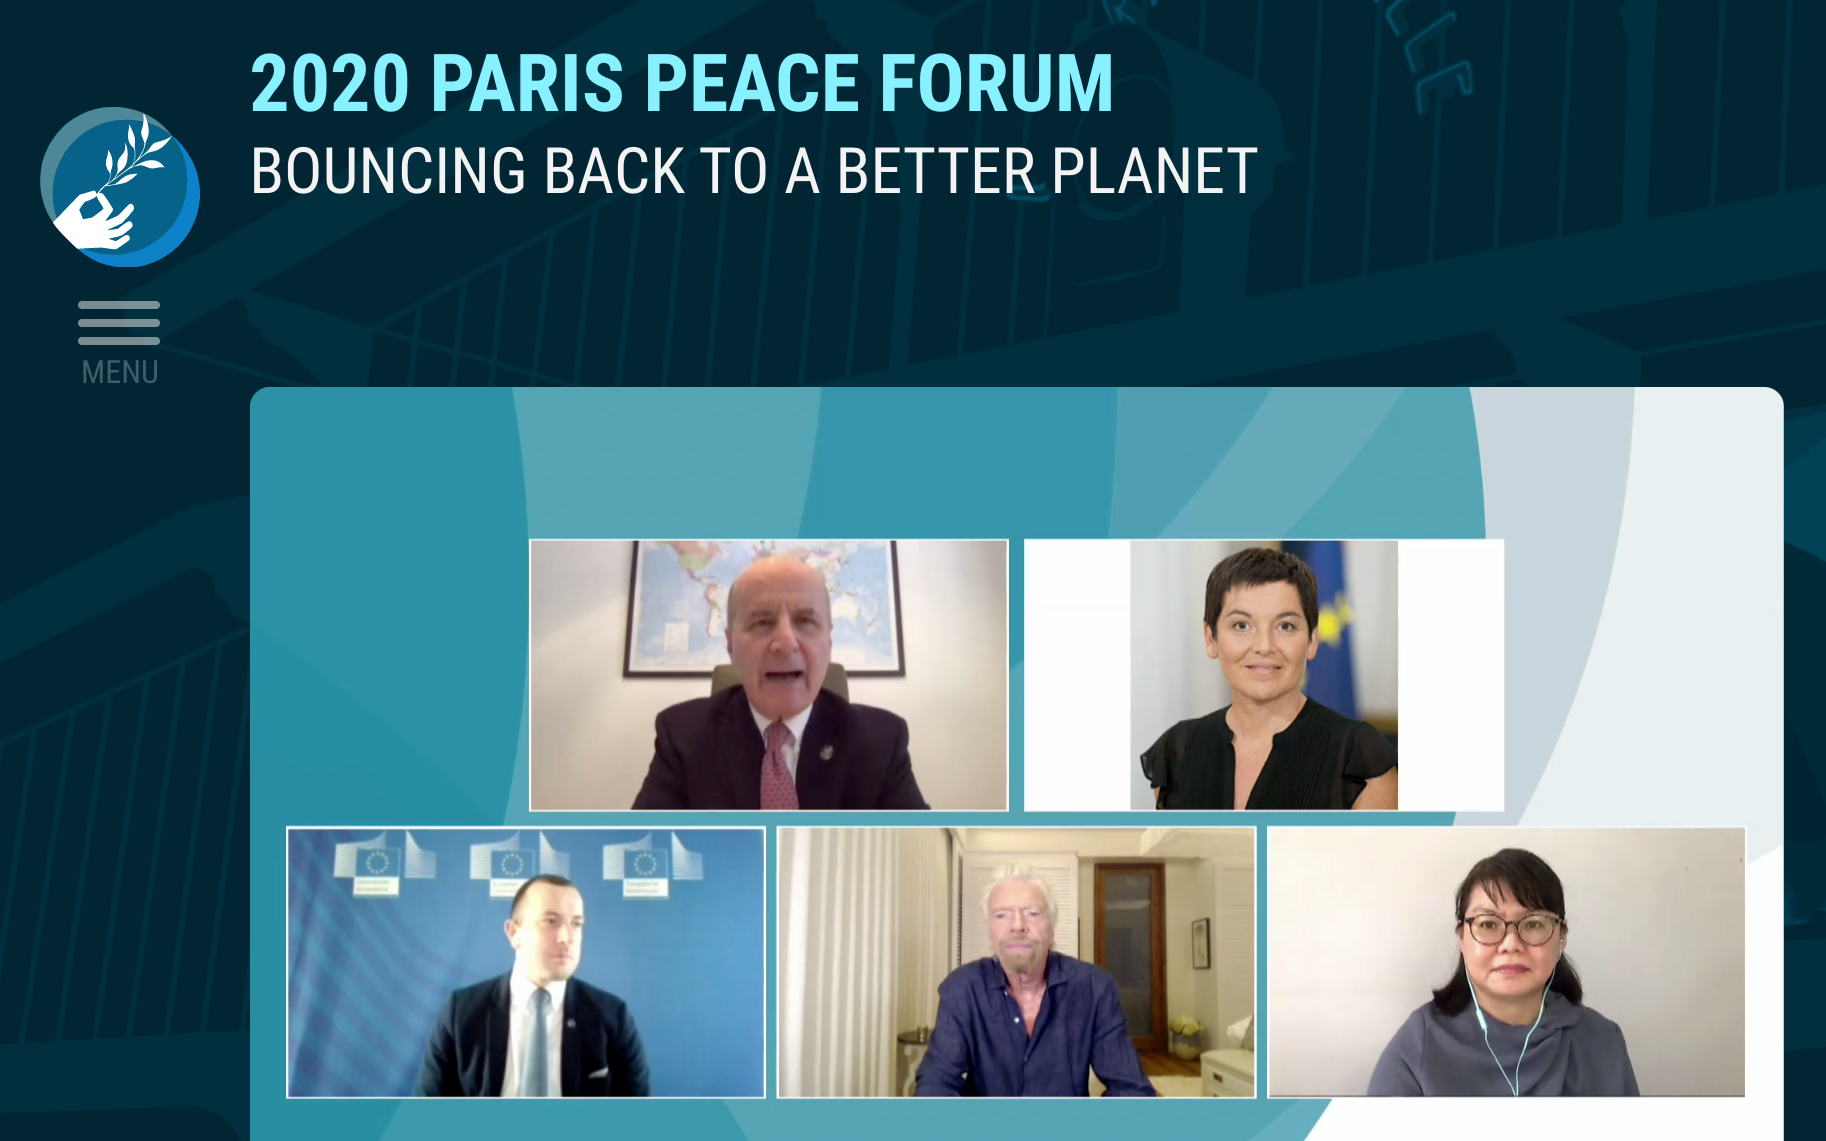 Image from the Paris Peace Forum